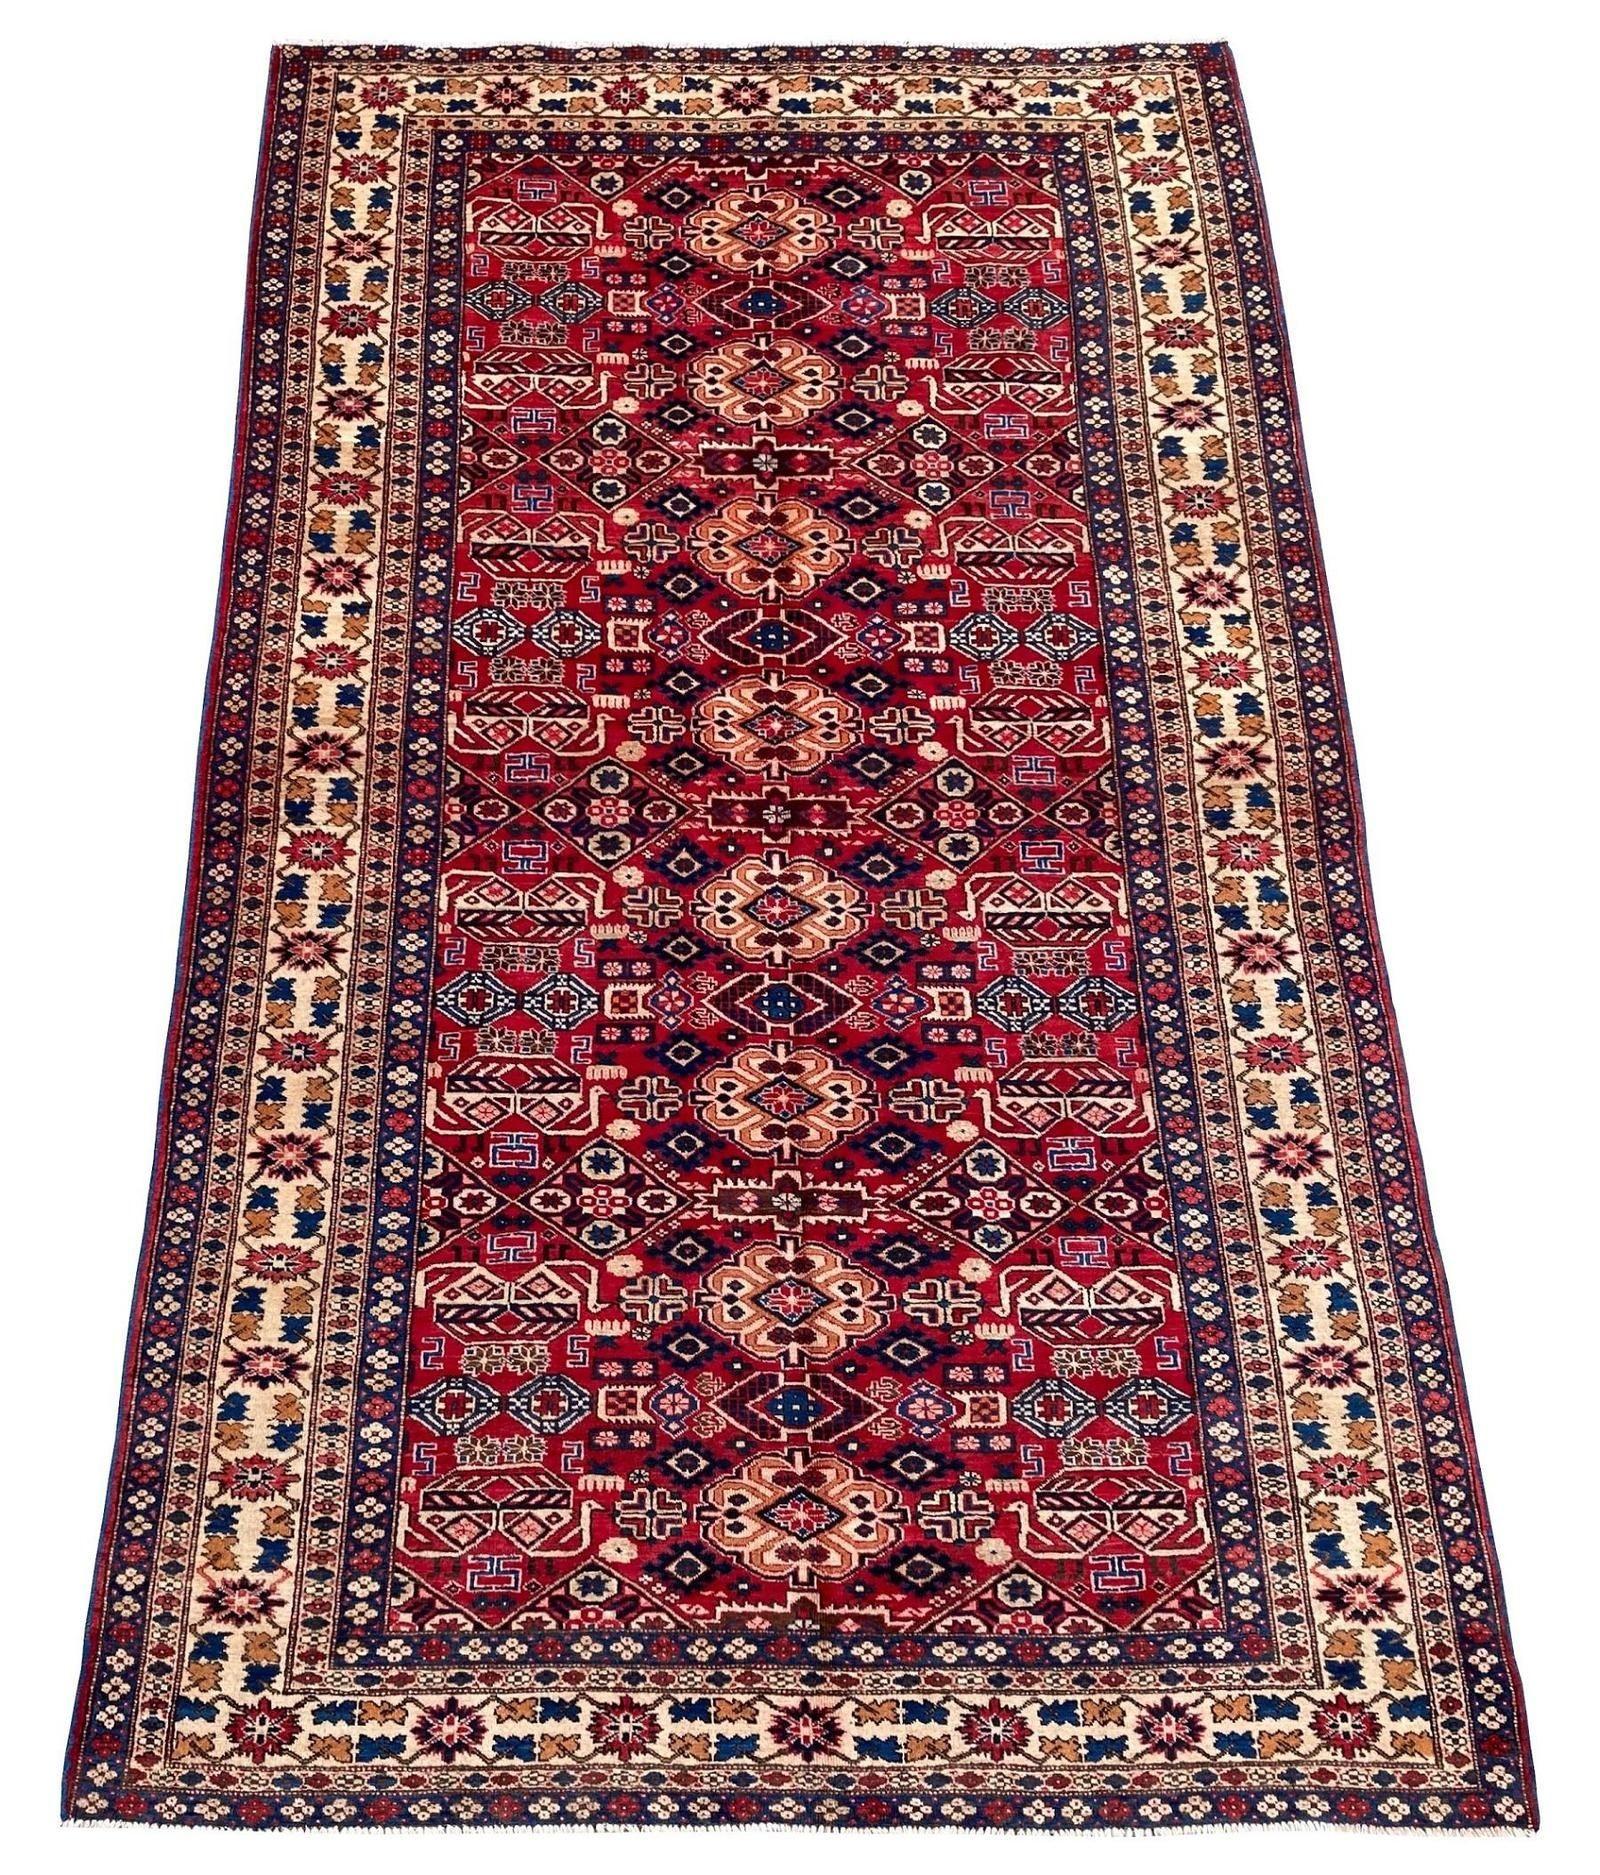 A beautiful antique Shirvan carpet, hand woven in the Caucasus mountains of south-east Azerbaidjan circa 1910 with a geometrical design of stylised flowers and birds on a rich red field and ivory border. Fabulous wool quality and great secondary